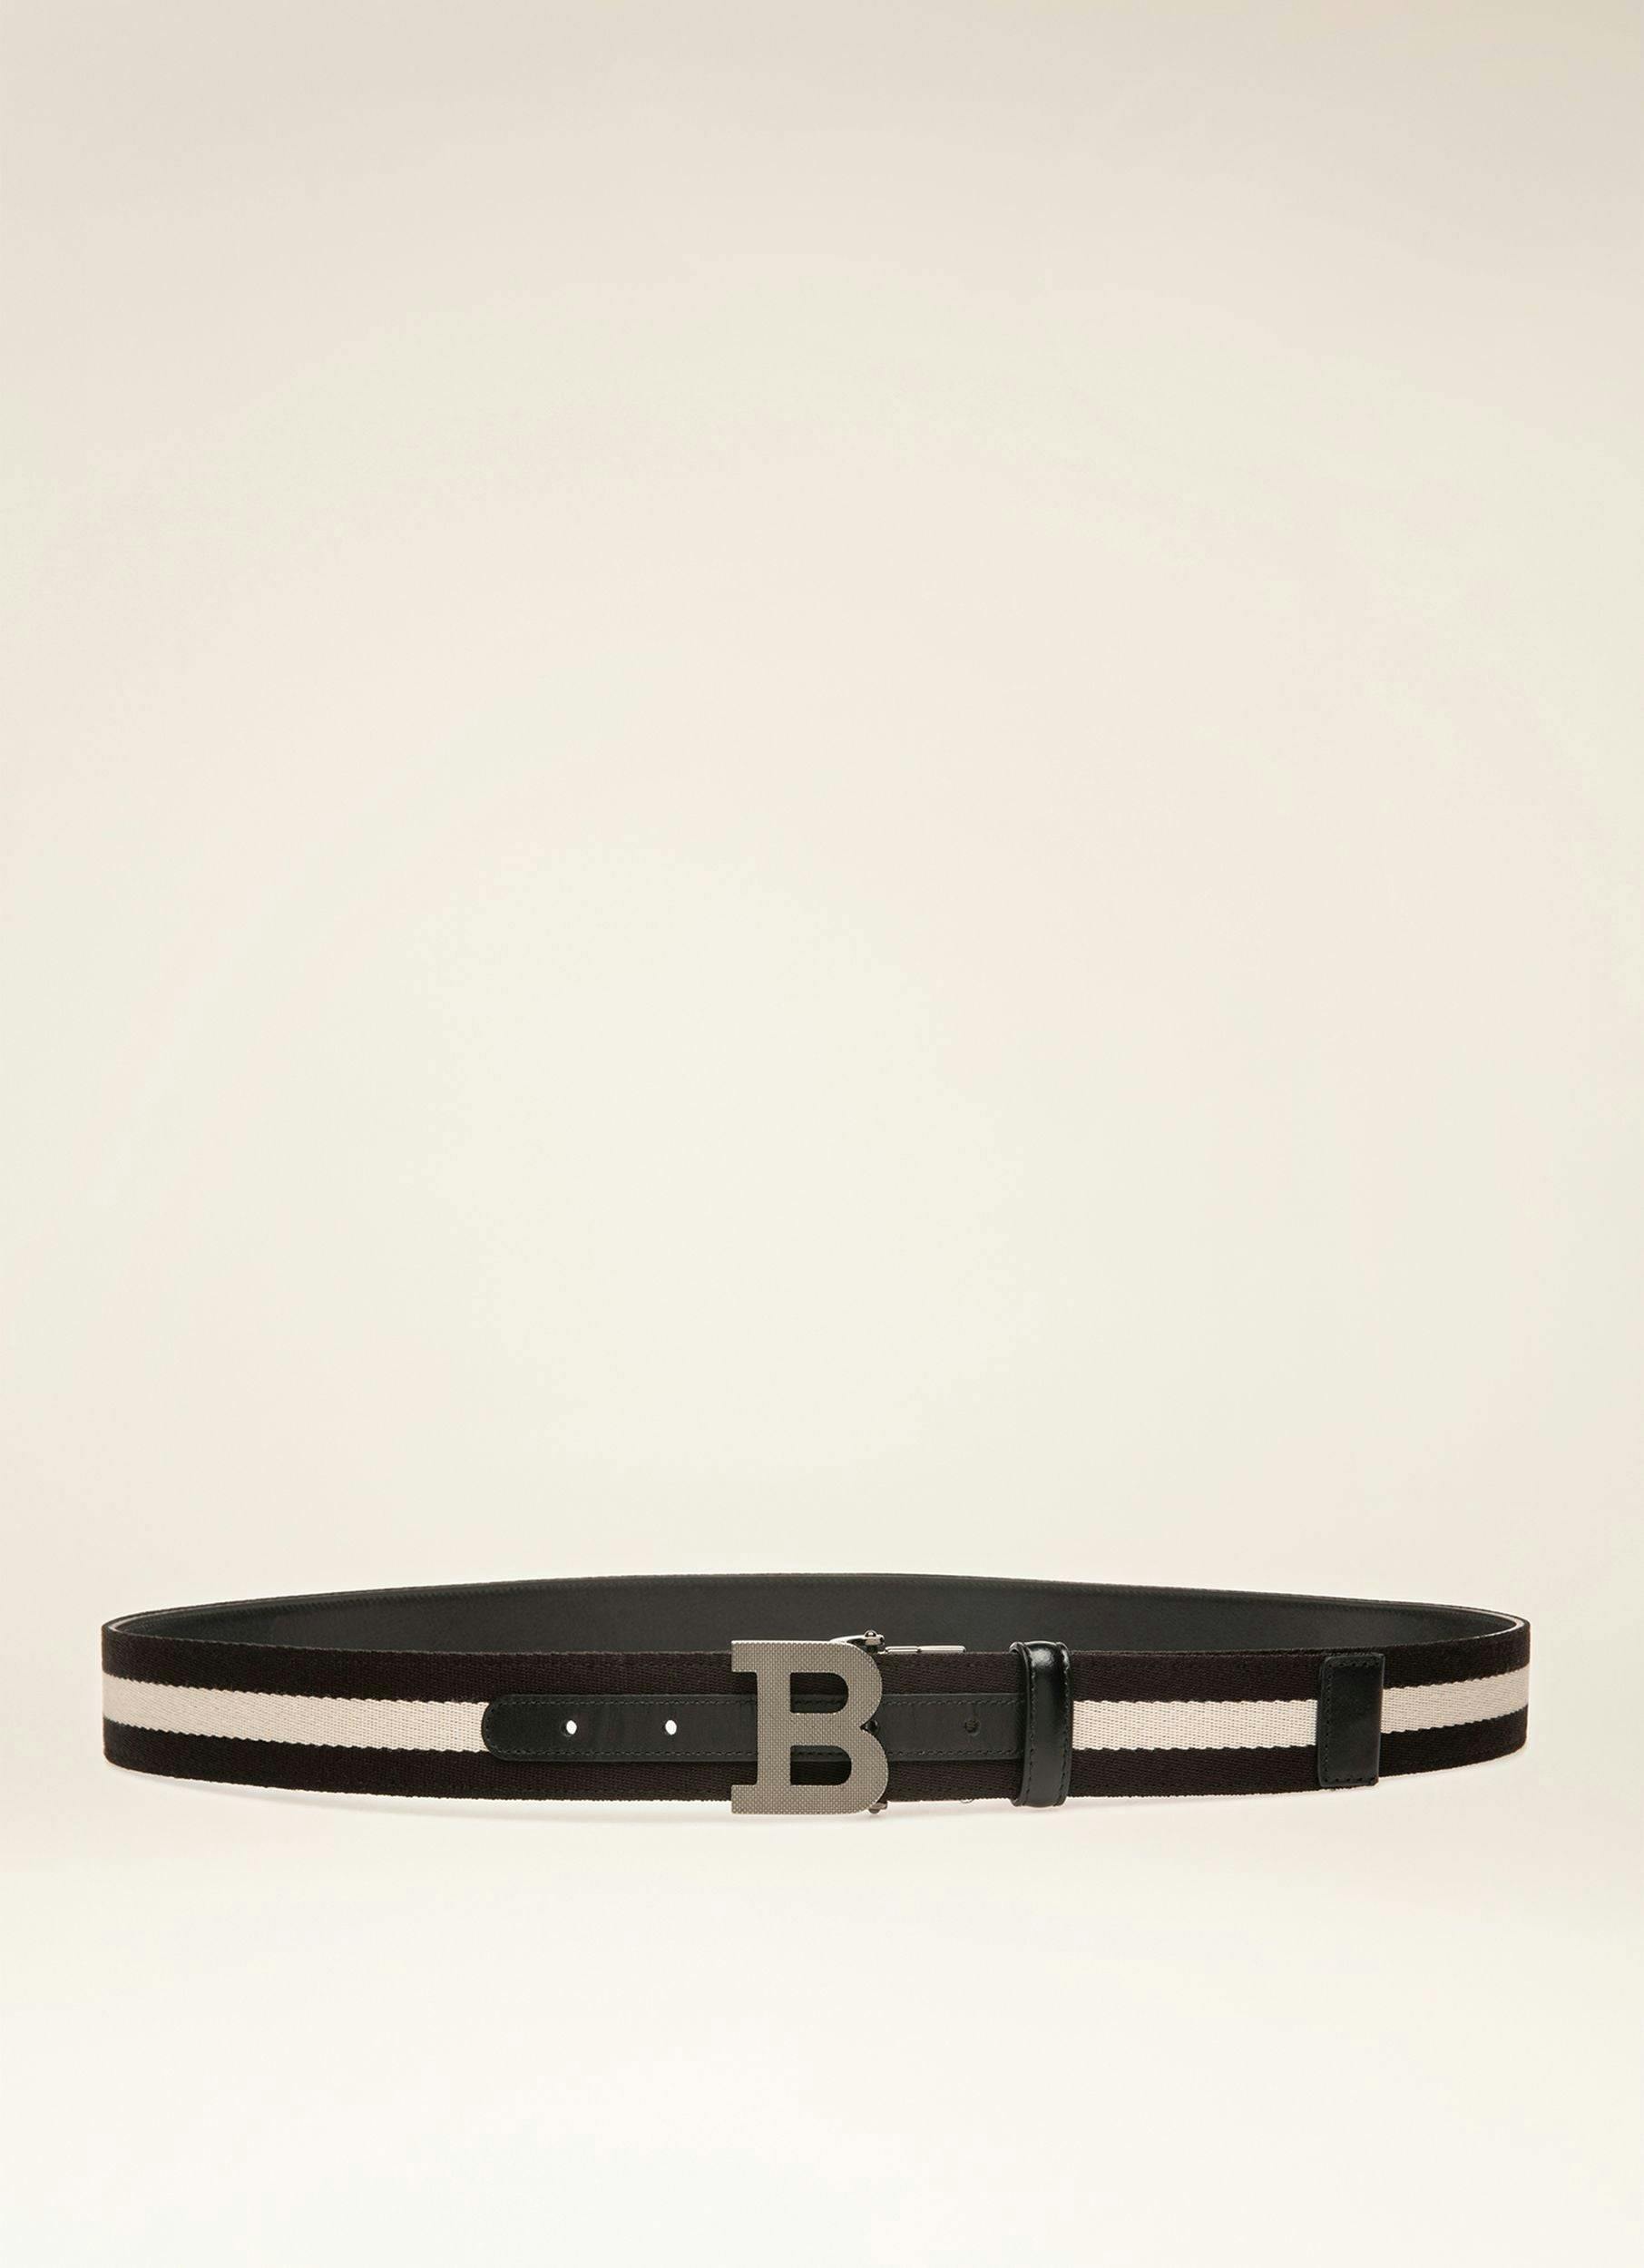 BALLY ICONIC BUCKLE Leather Fixed & Reversible 35Mm Belt In Black & Beige - Men's - Bally - 01